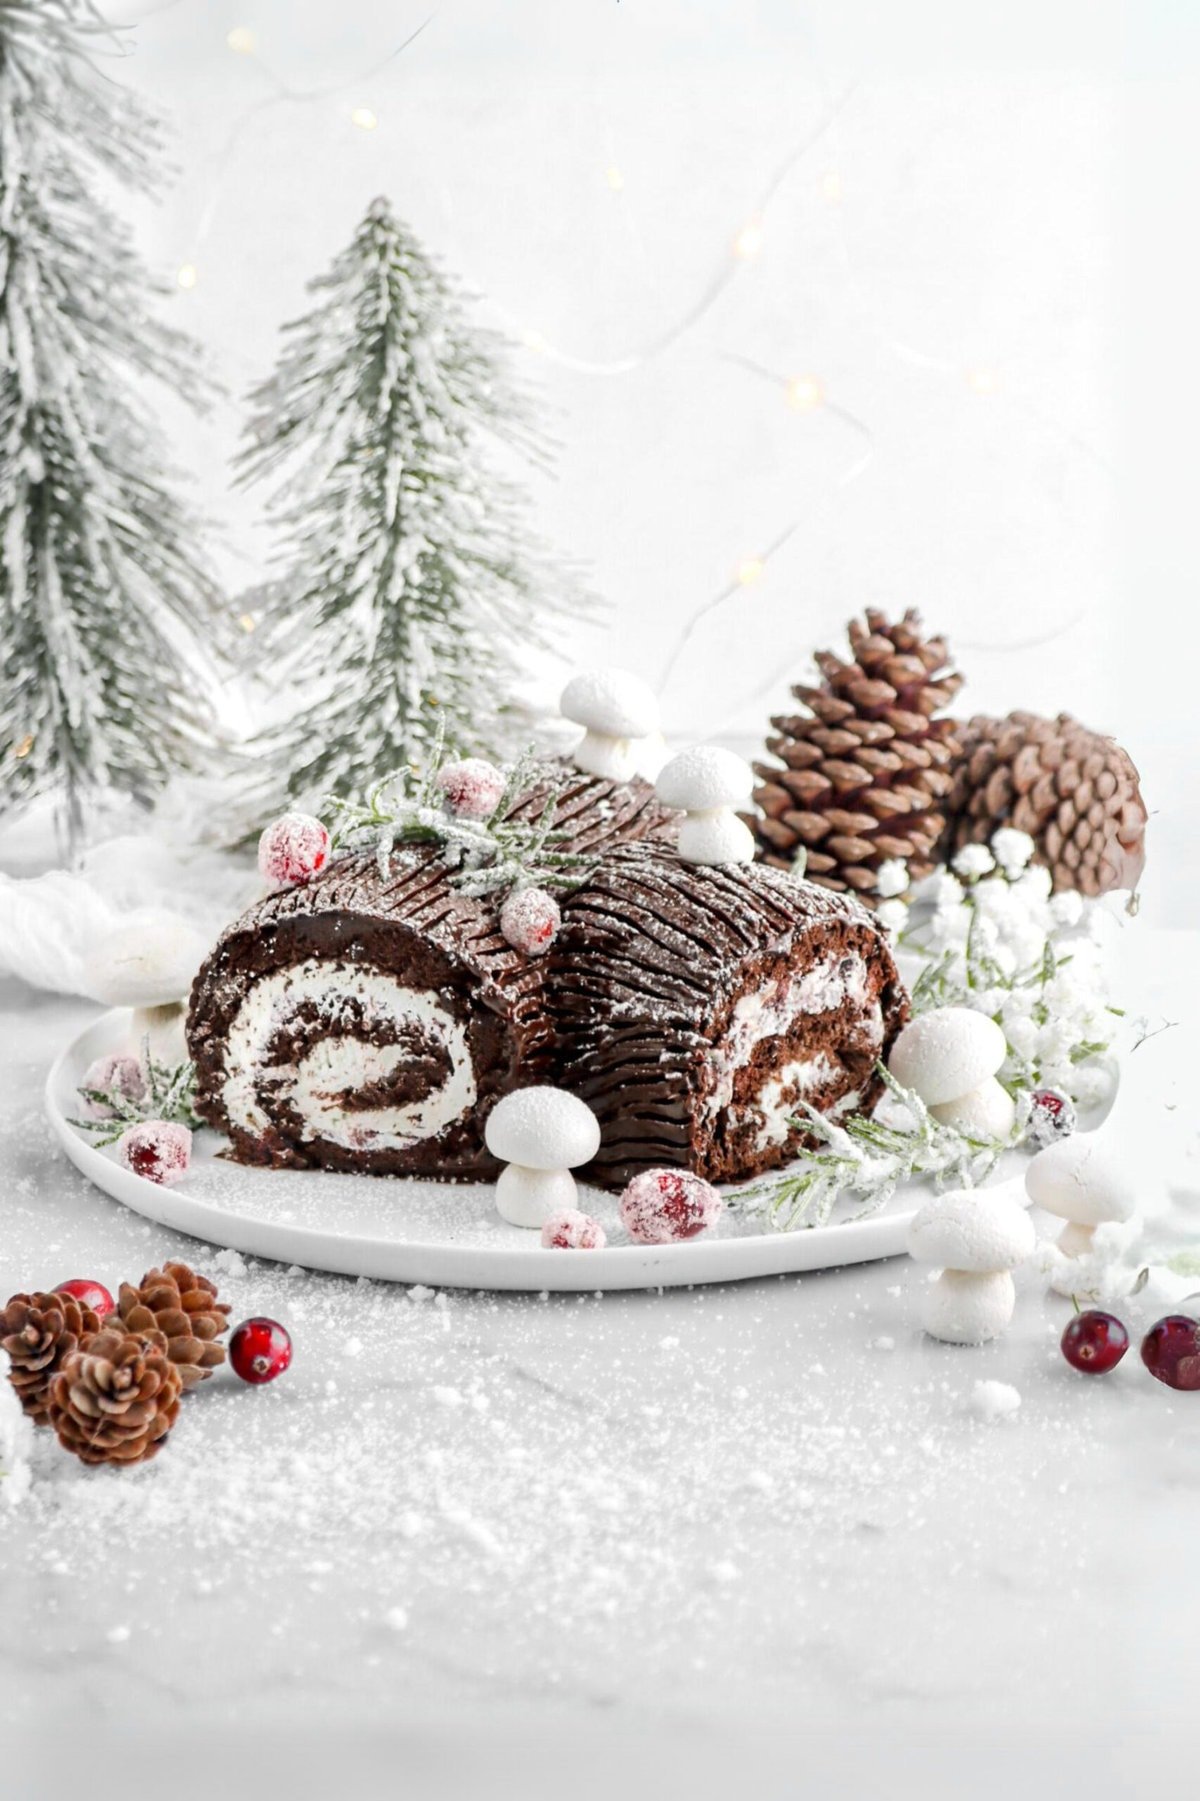 yule log on white plate with sugared rosemary and cranberries, meringue mushrooms, and pine cones around.